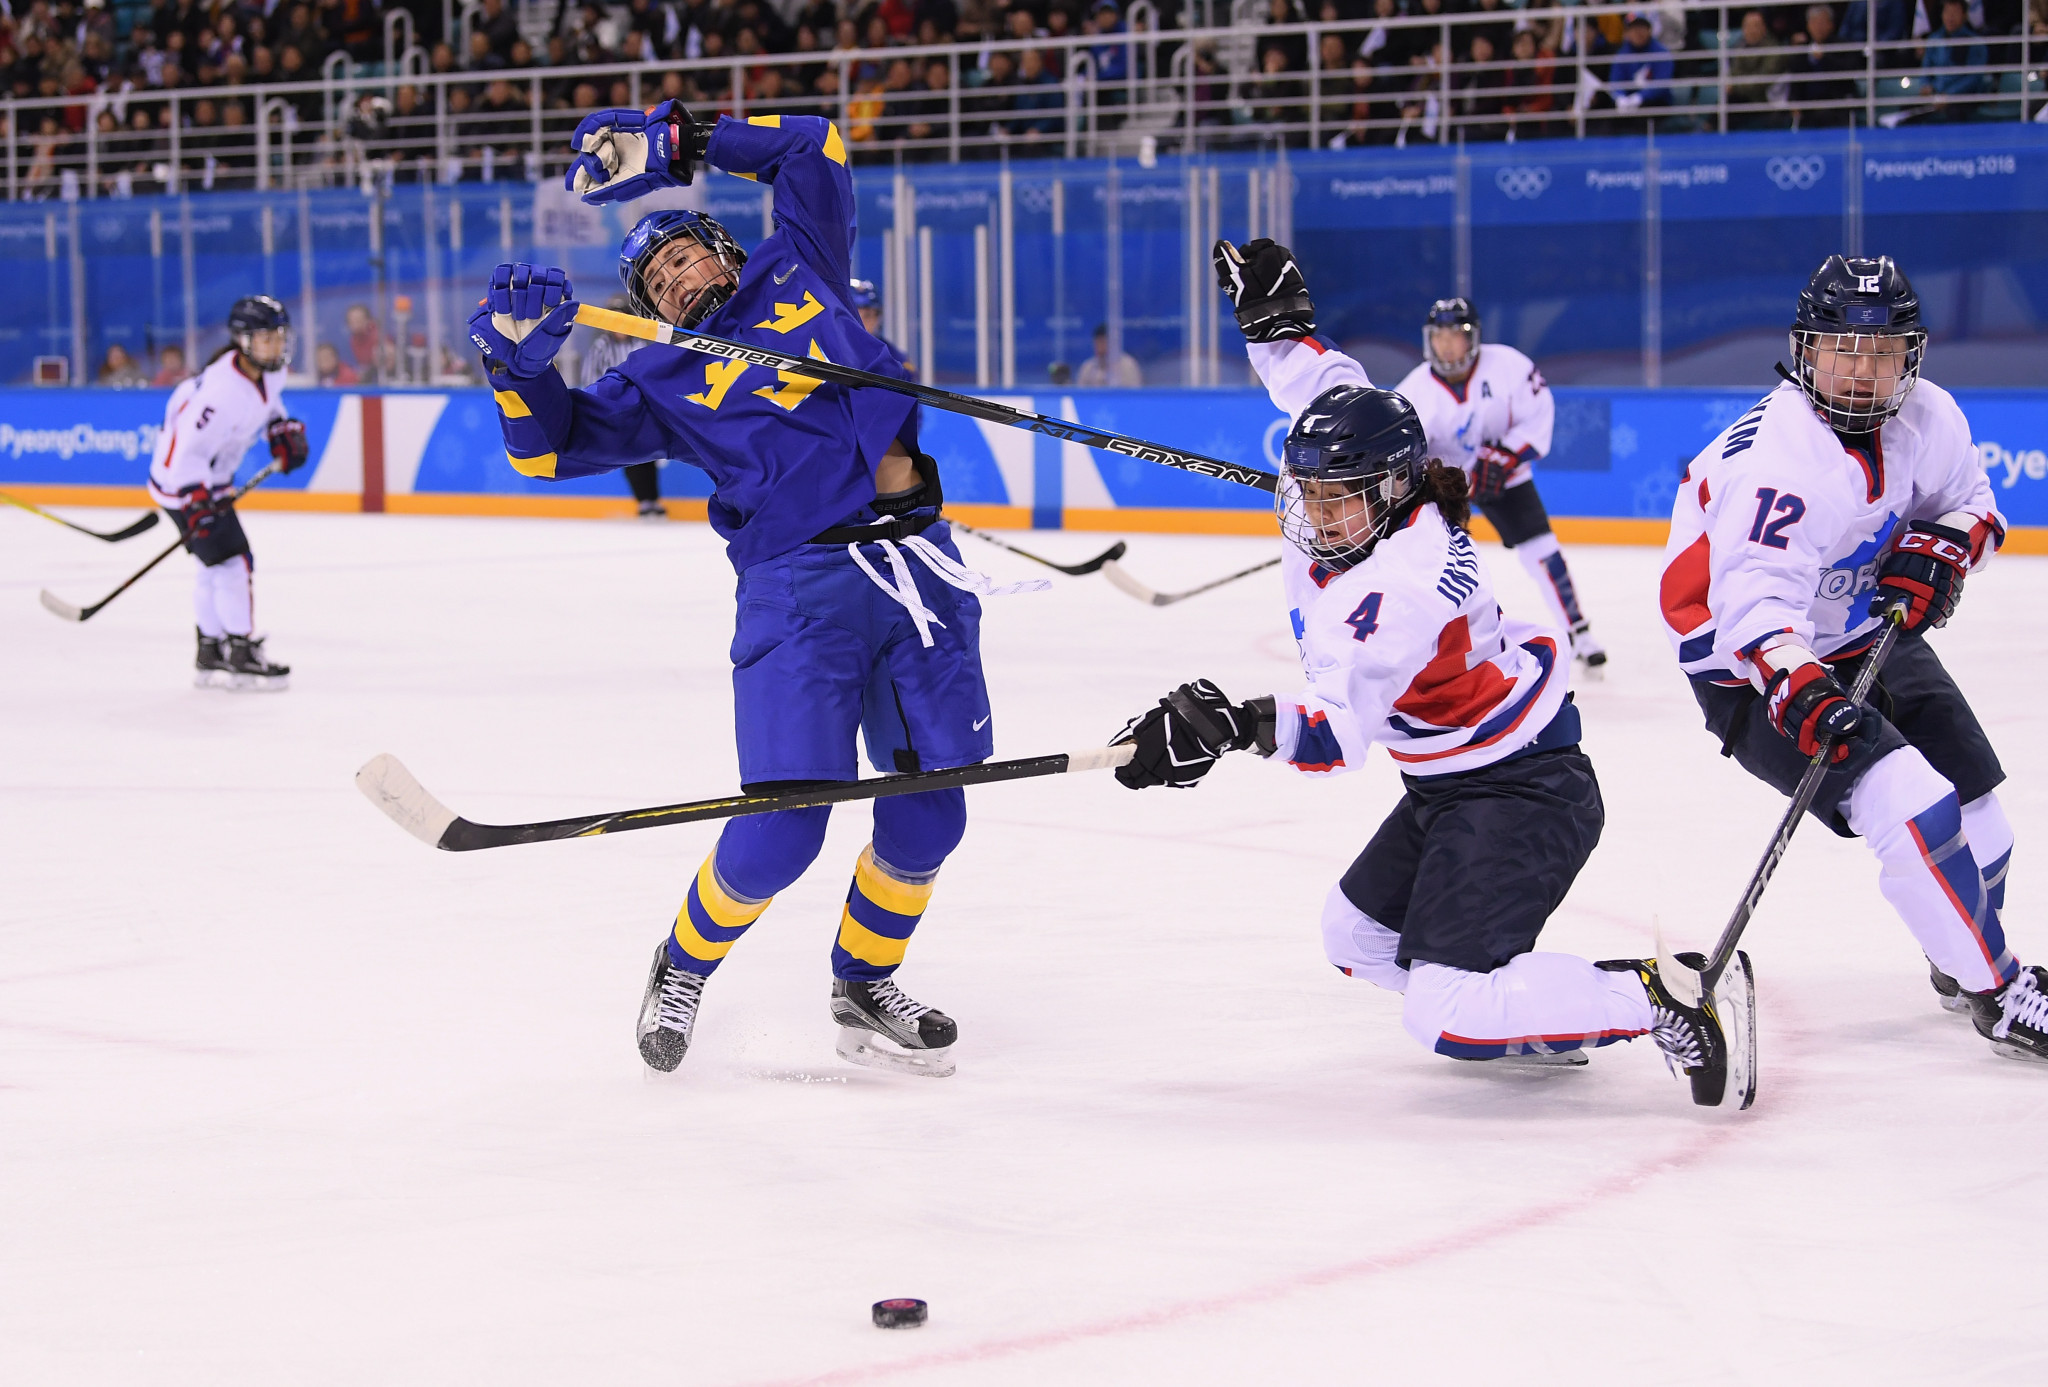 North Korean ice hockey player Un Hyang Kim failed a drug test at Pyeongchang 2018 but was allowed to continue playing ©Getty Images